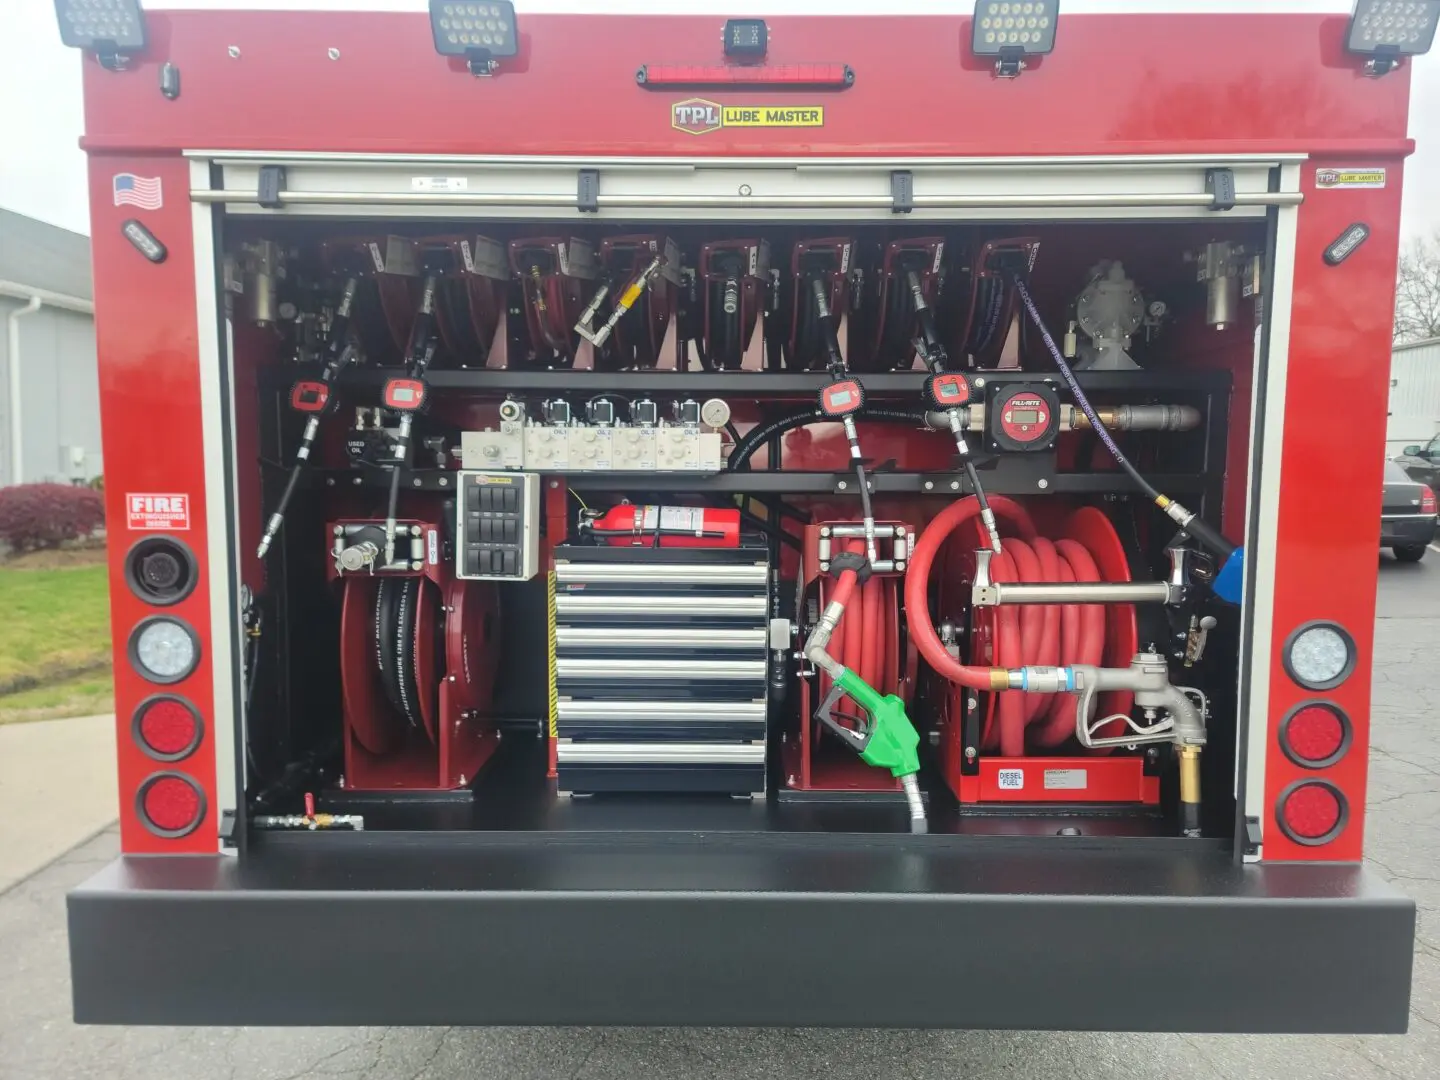 A fire truck with many compartments and tools.